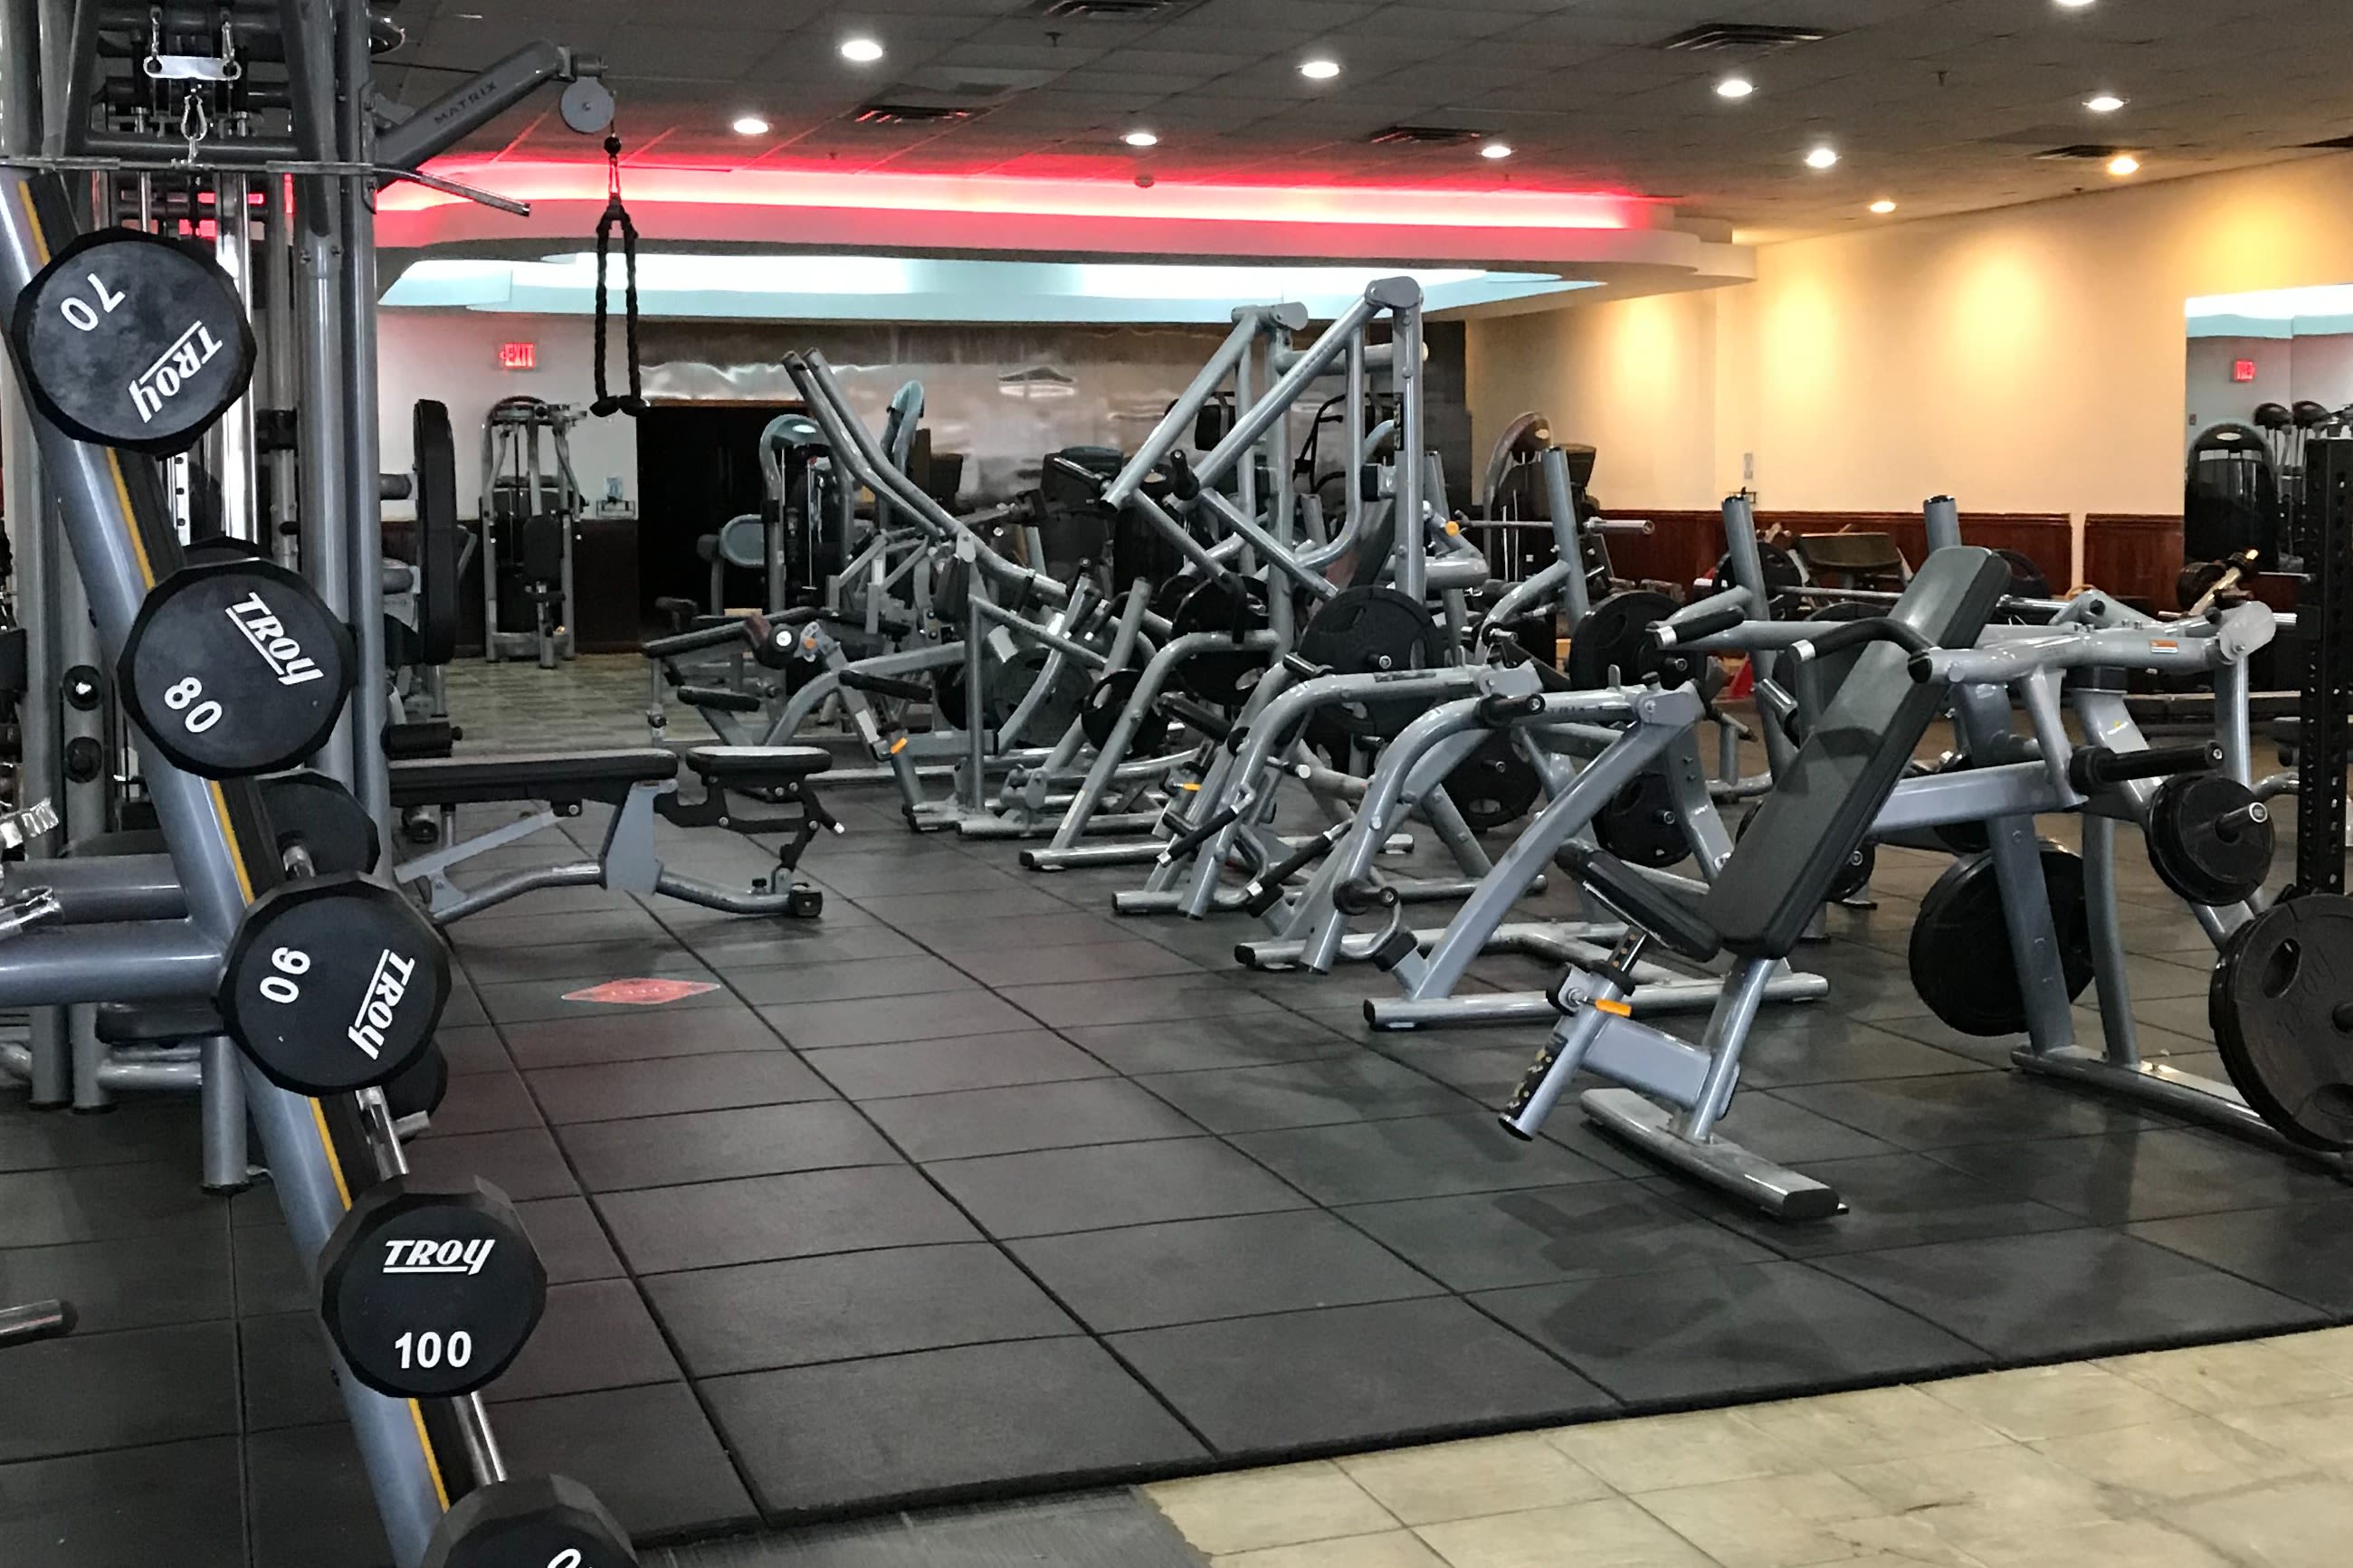 Powerhouse Gym - Syracuse: Read Reviews and Book Classes on ClassPass